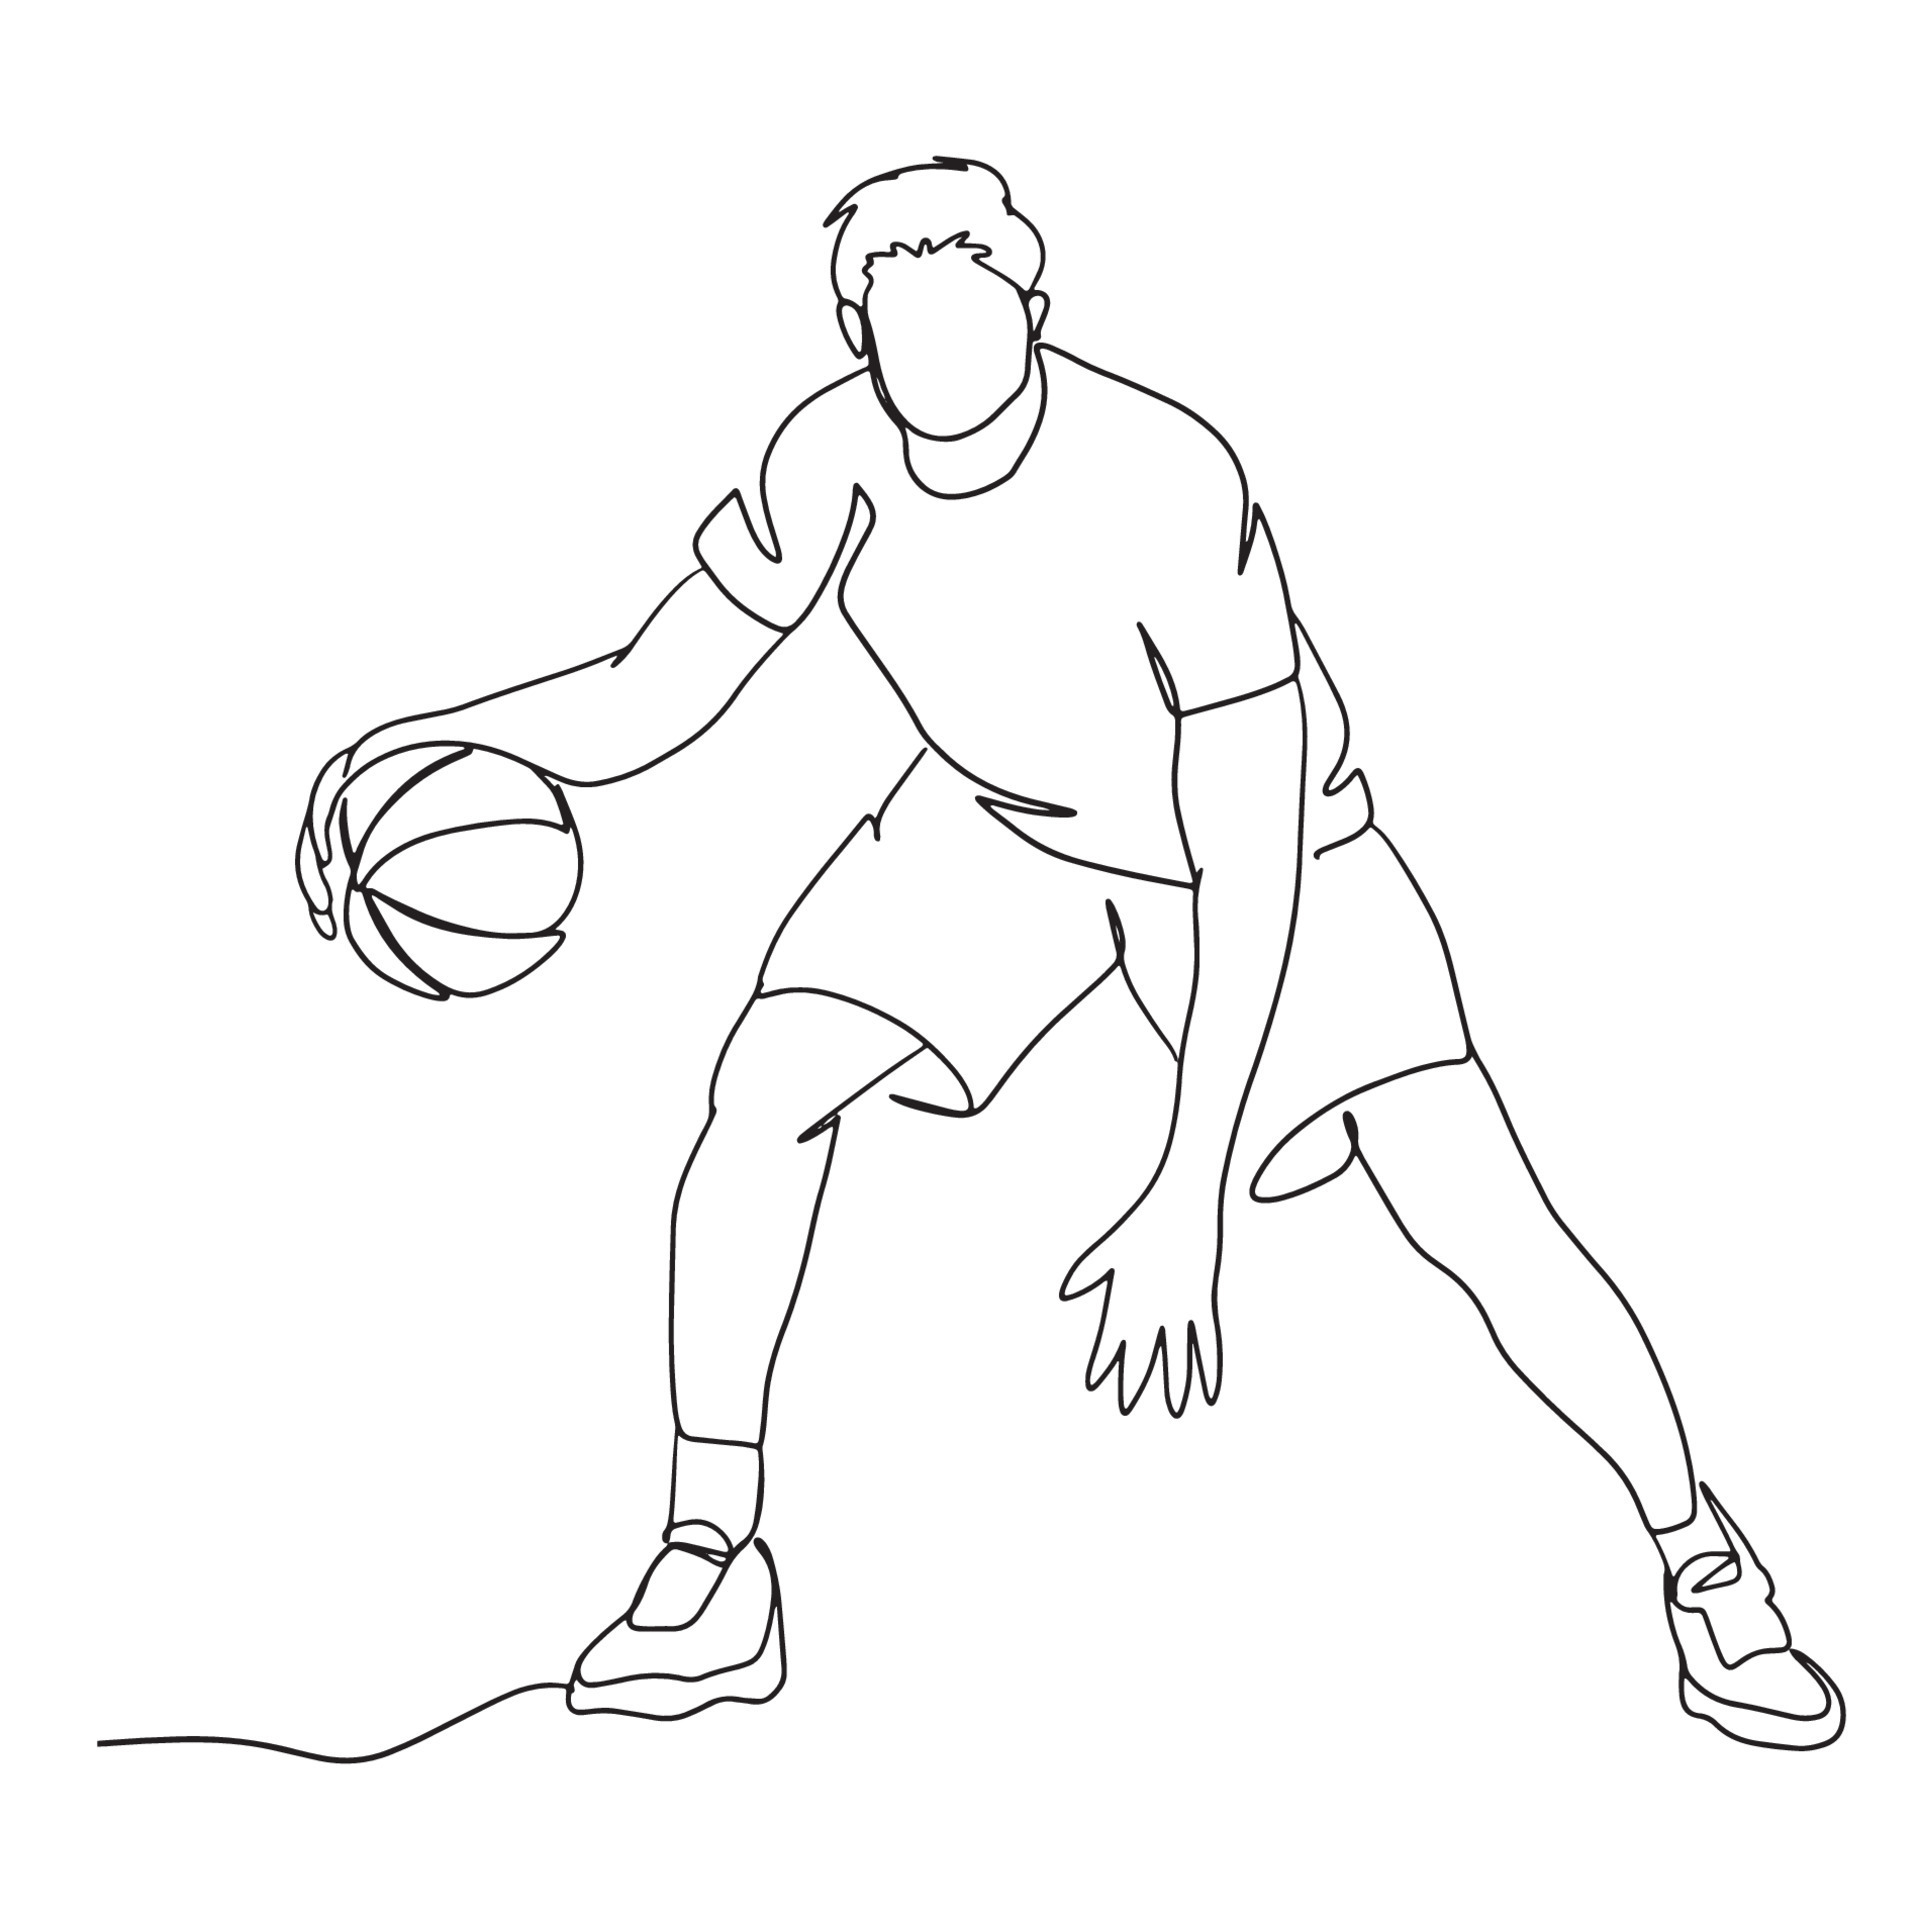 Basketball Line Art, Ball Palyer Outline Drawing, Simple Athlete Sketch ...